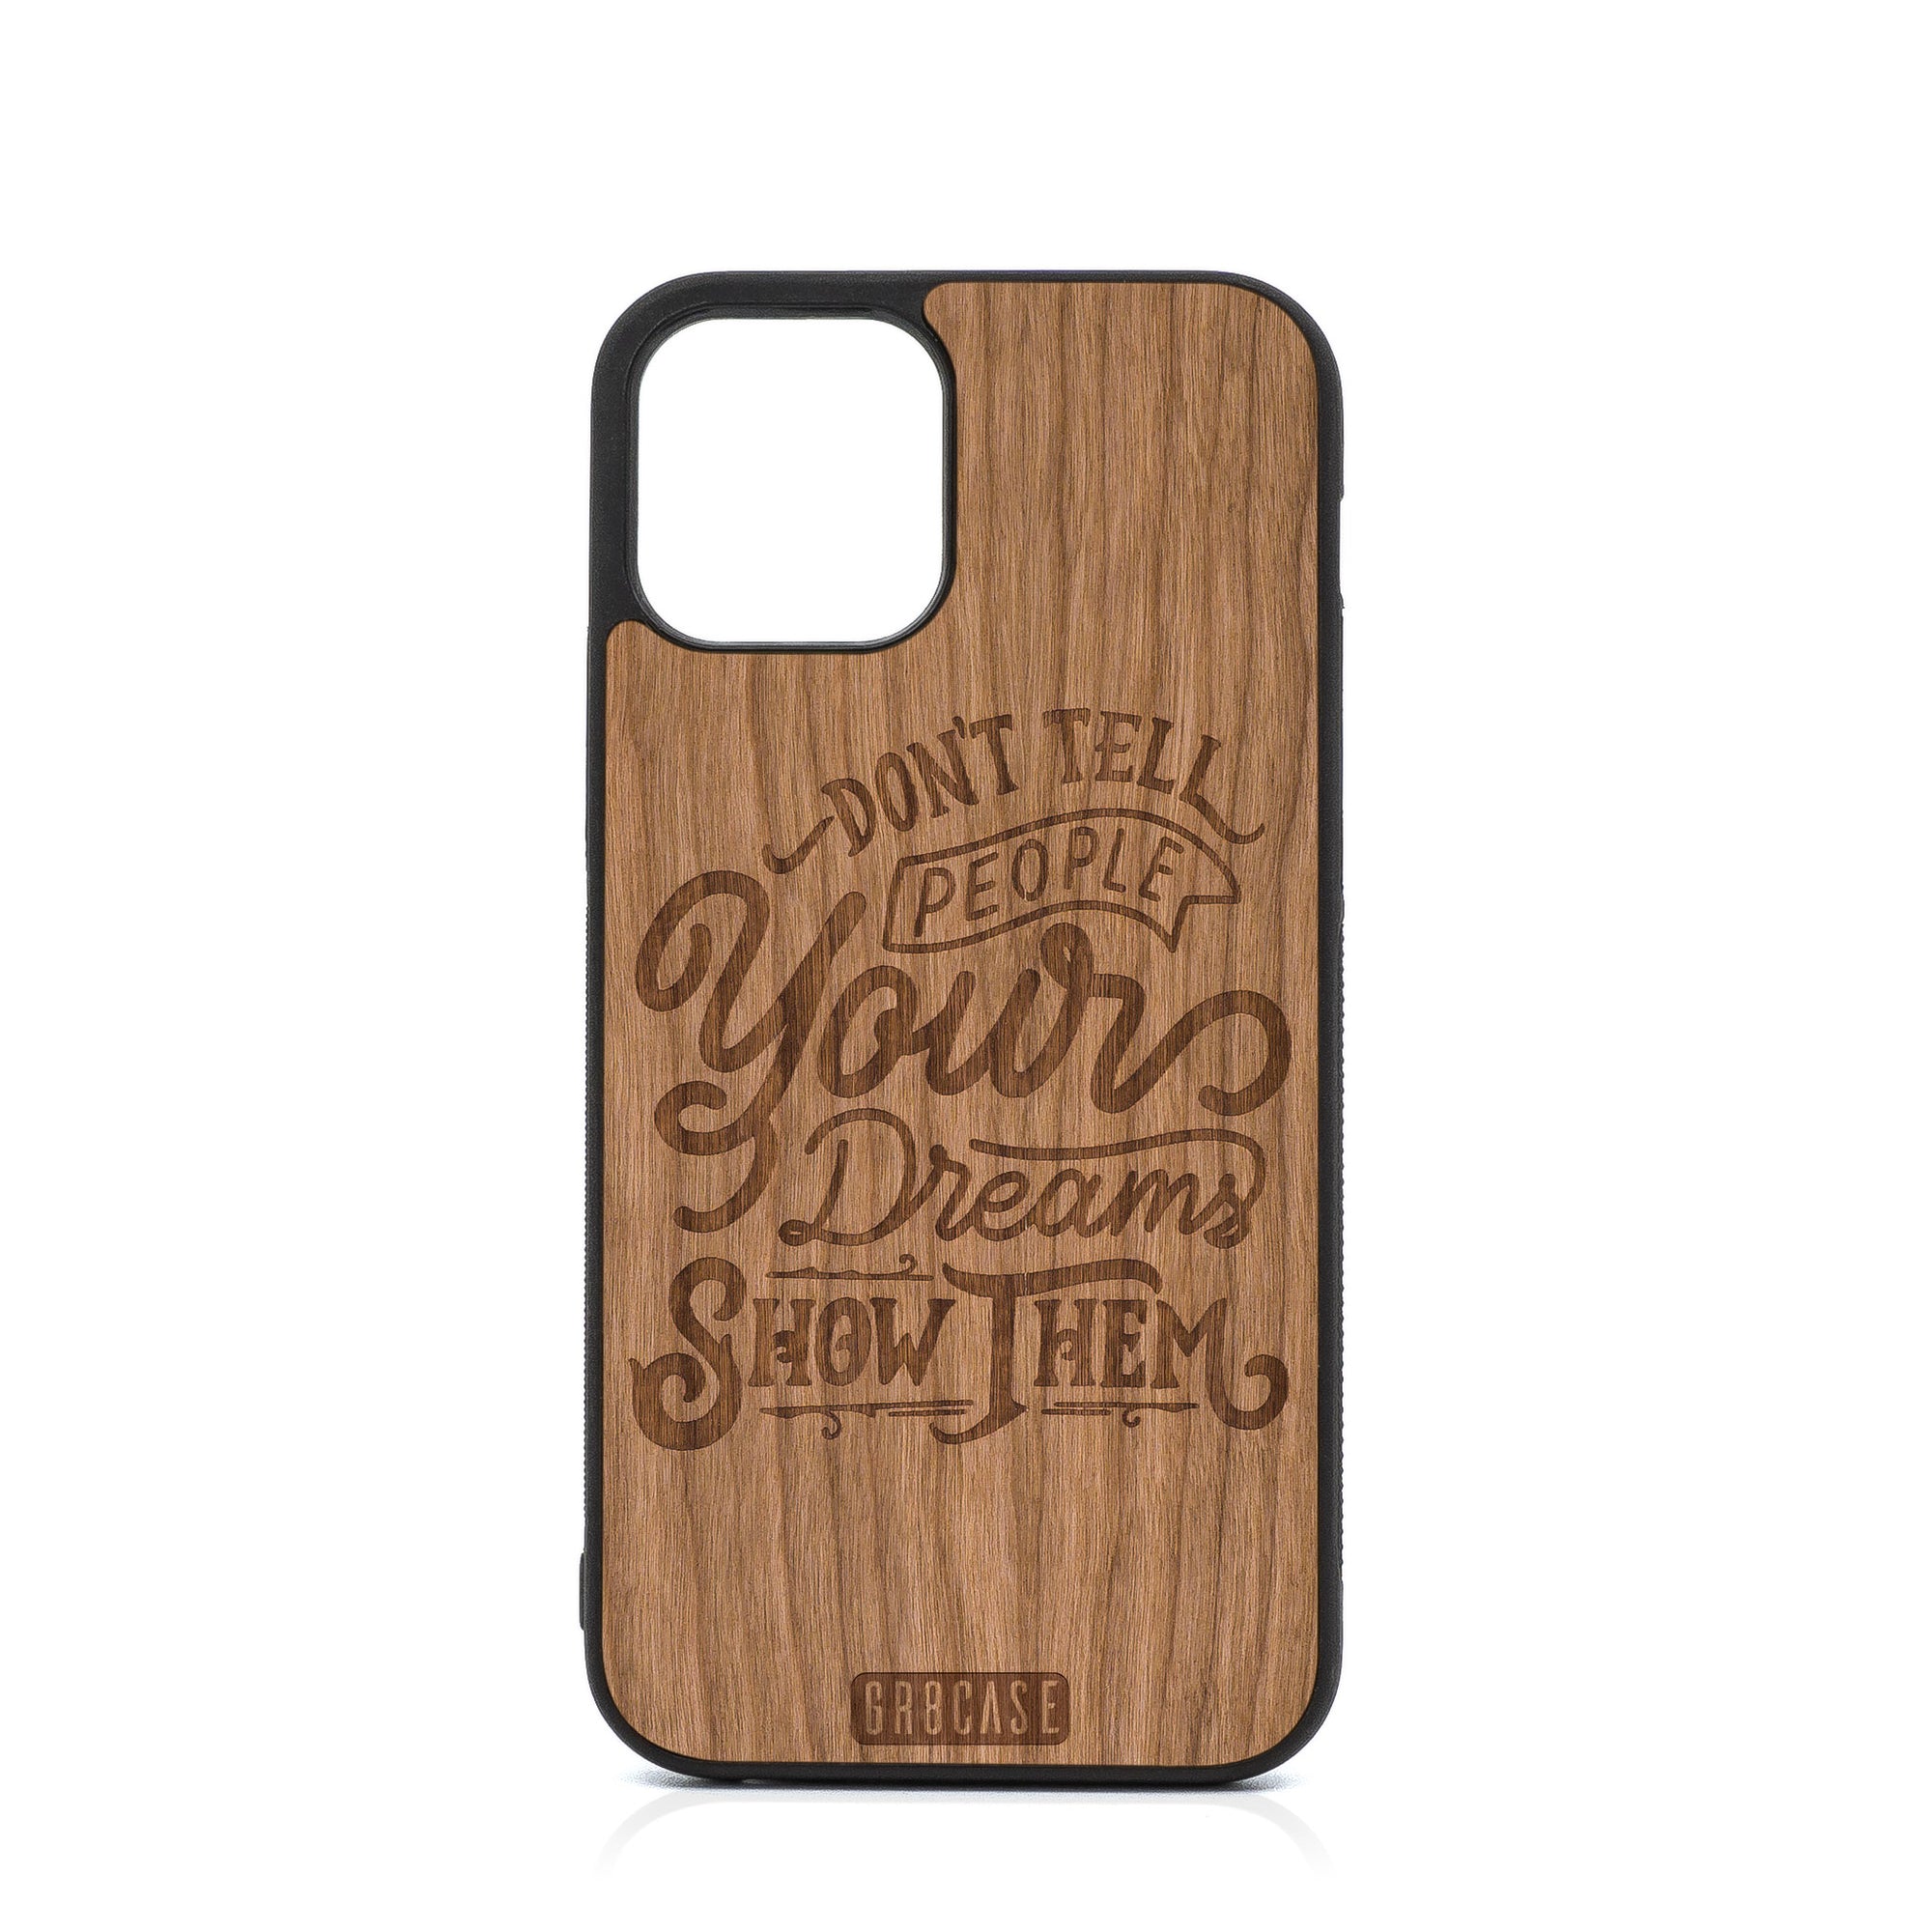 Don't Tell People Your Dreams Show Them Design Wood Case For iPhone 12 Pro